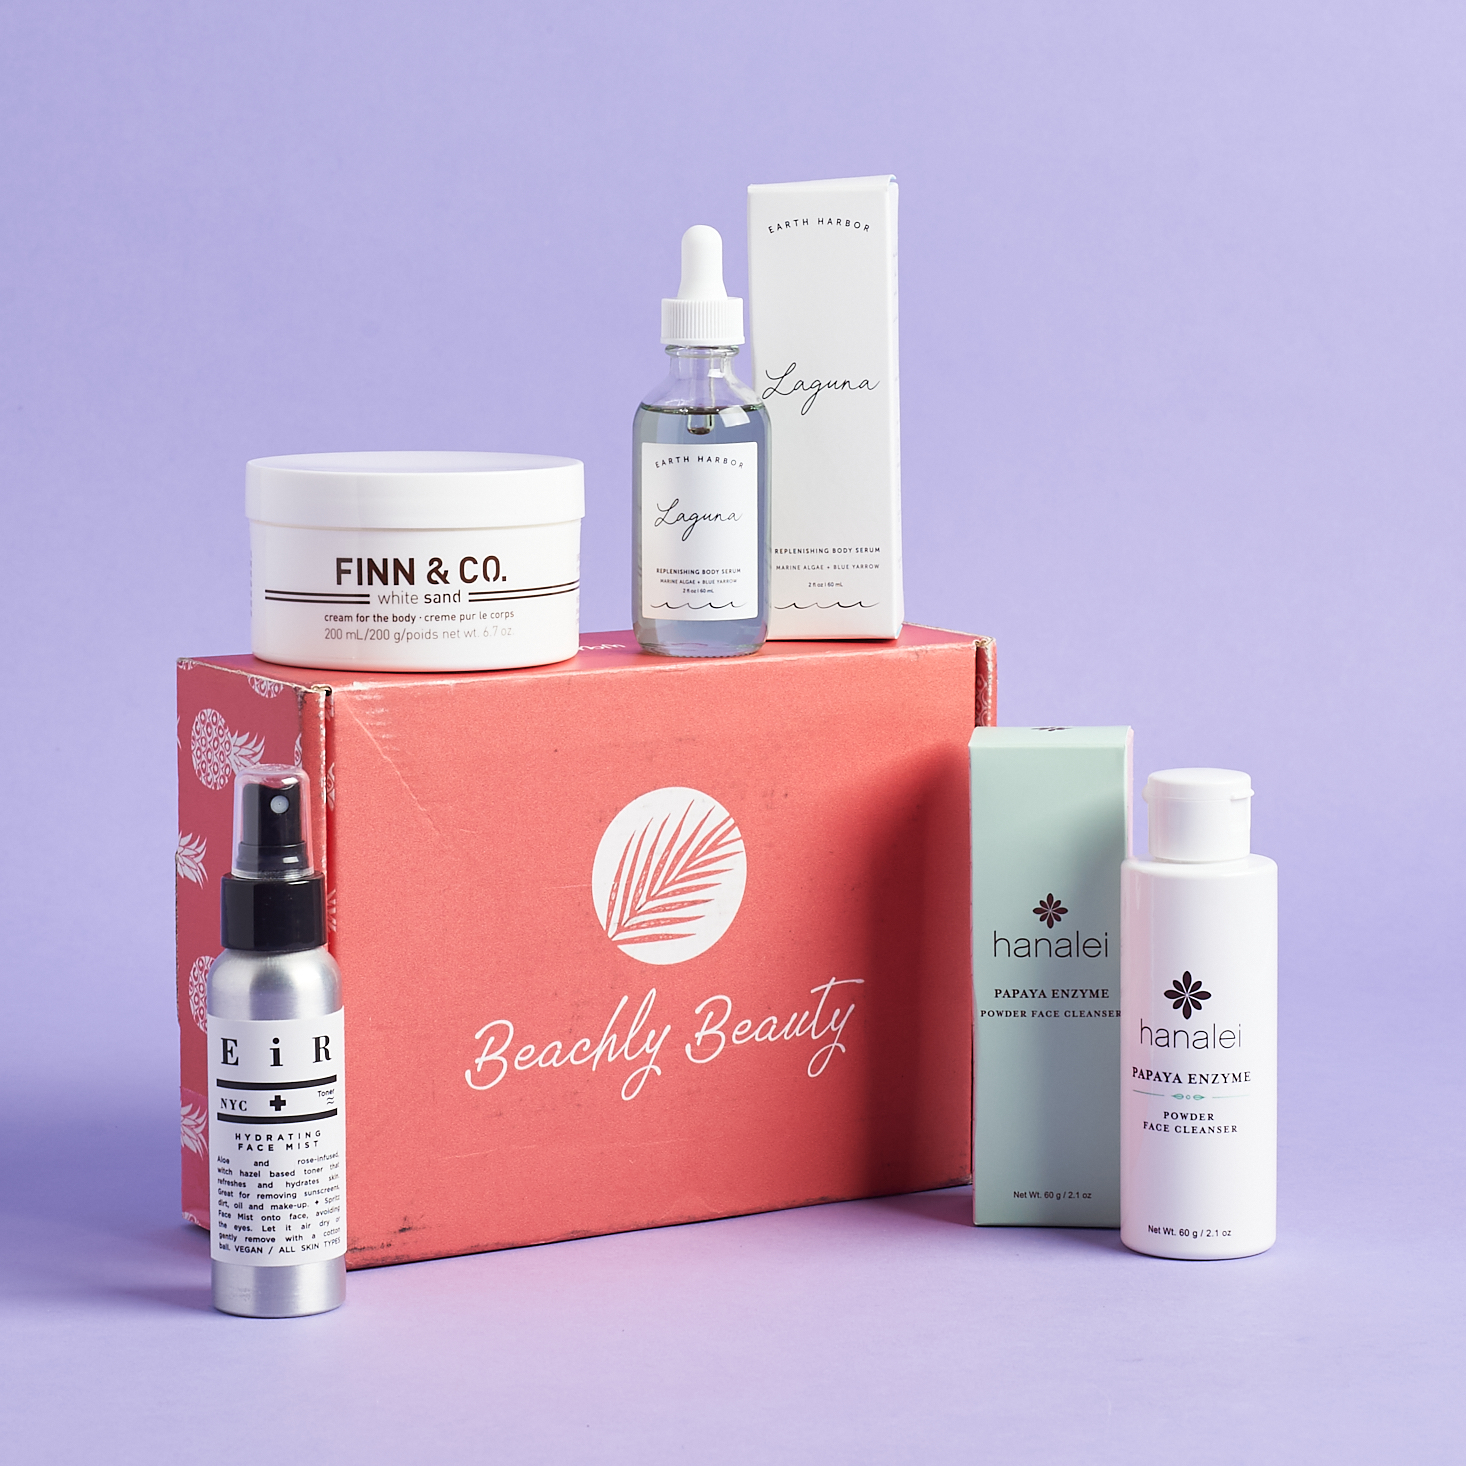 Beachly Beauty Box September 2021 Review